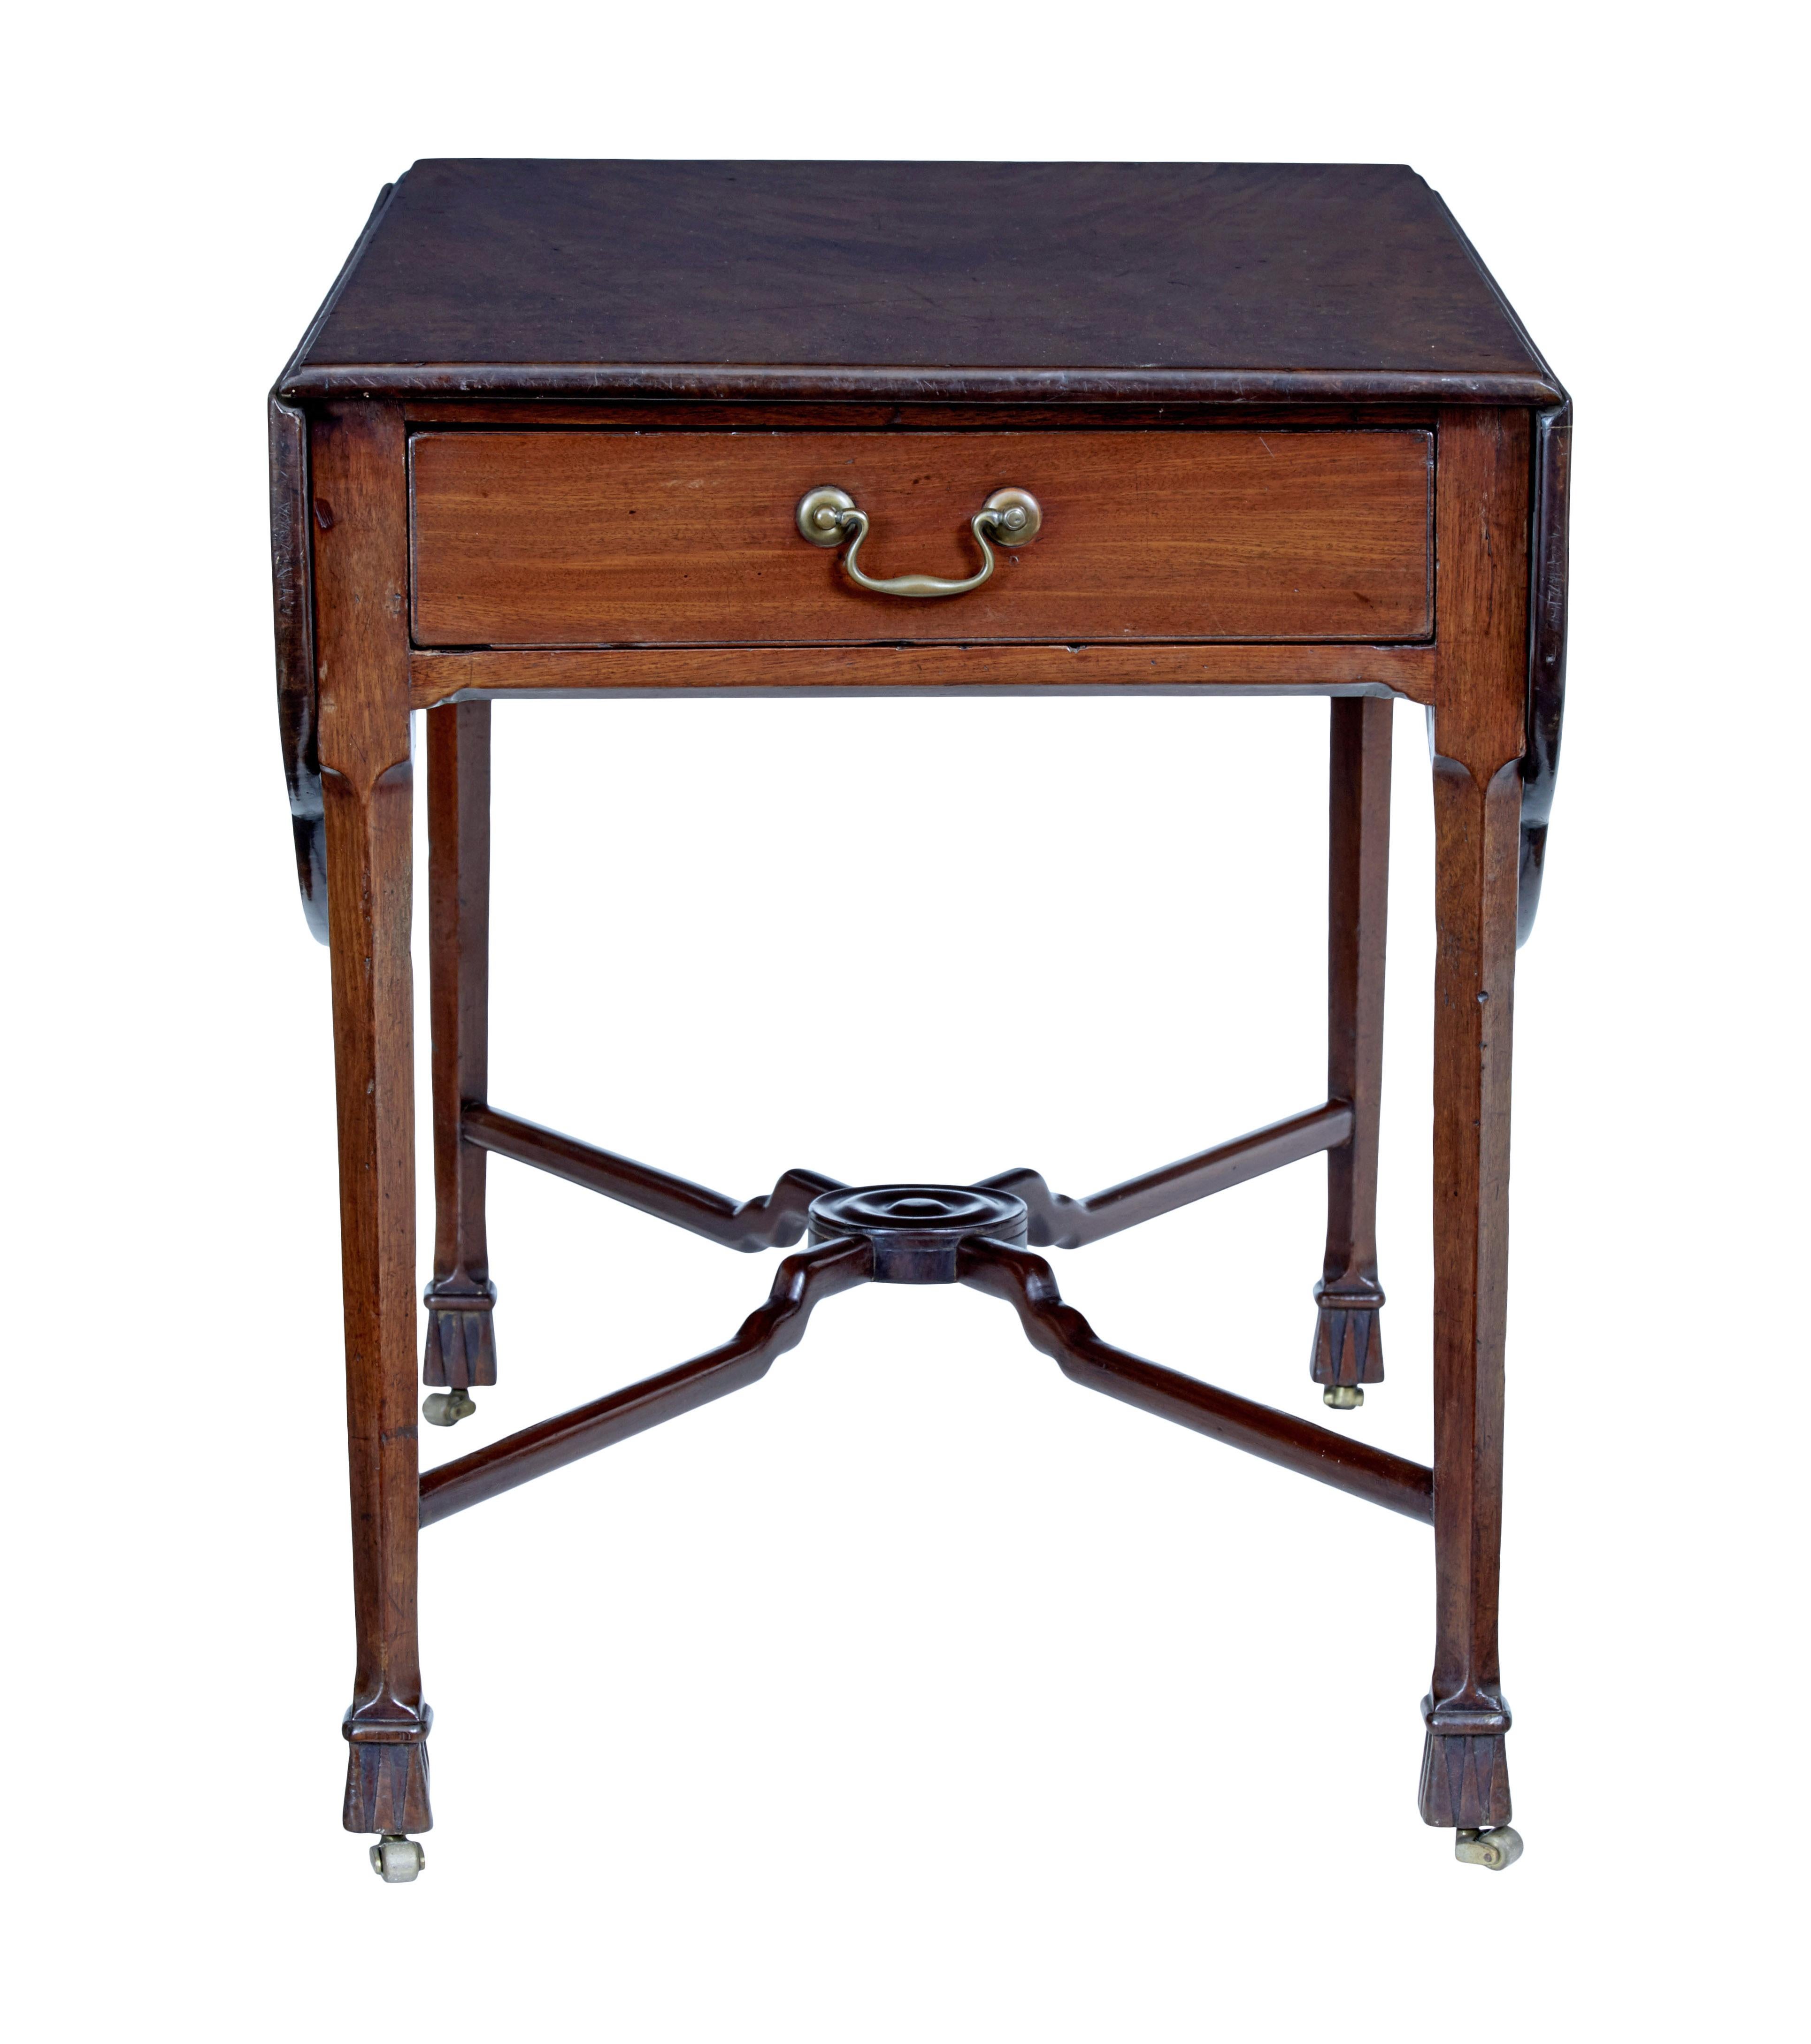 18th century Chippendale mahogany pembroke table, circa 1770.

Here present a Chippendale period pembroke table made in the finest mahogany.

Shaped drop leaves open to for a flame mahogany top. Drawer fitted with later brass swan neck handle on